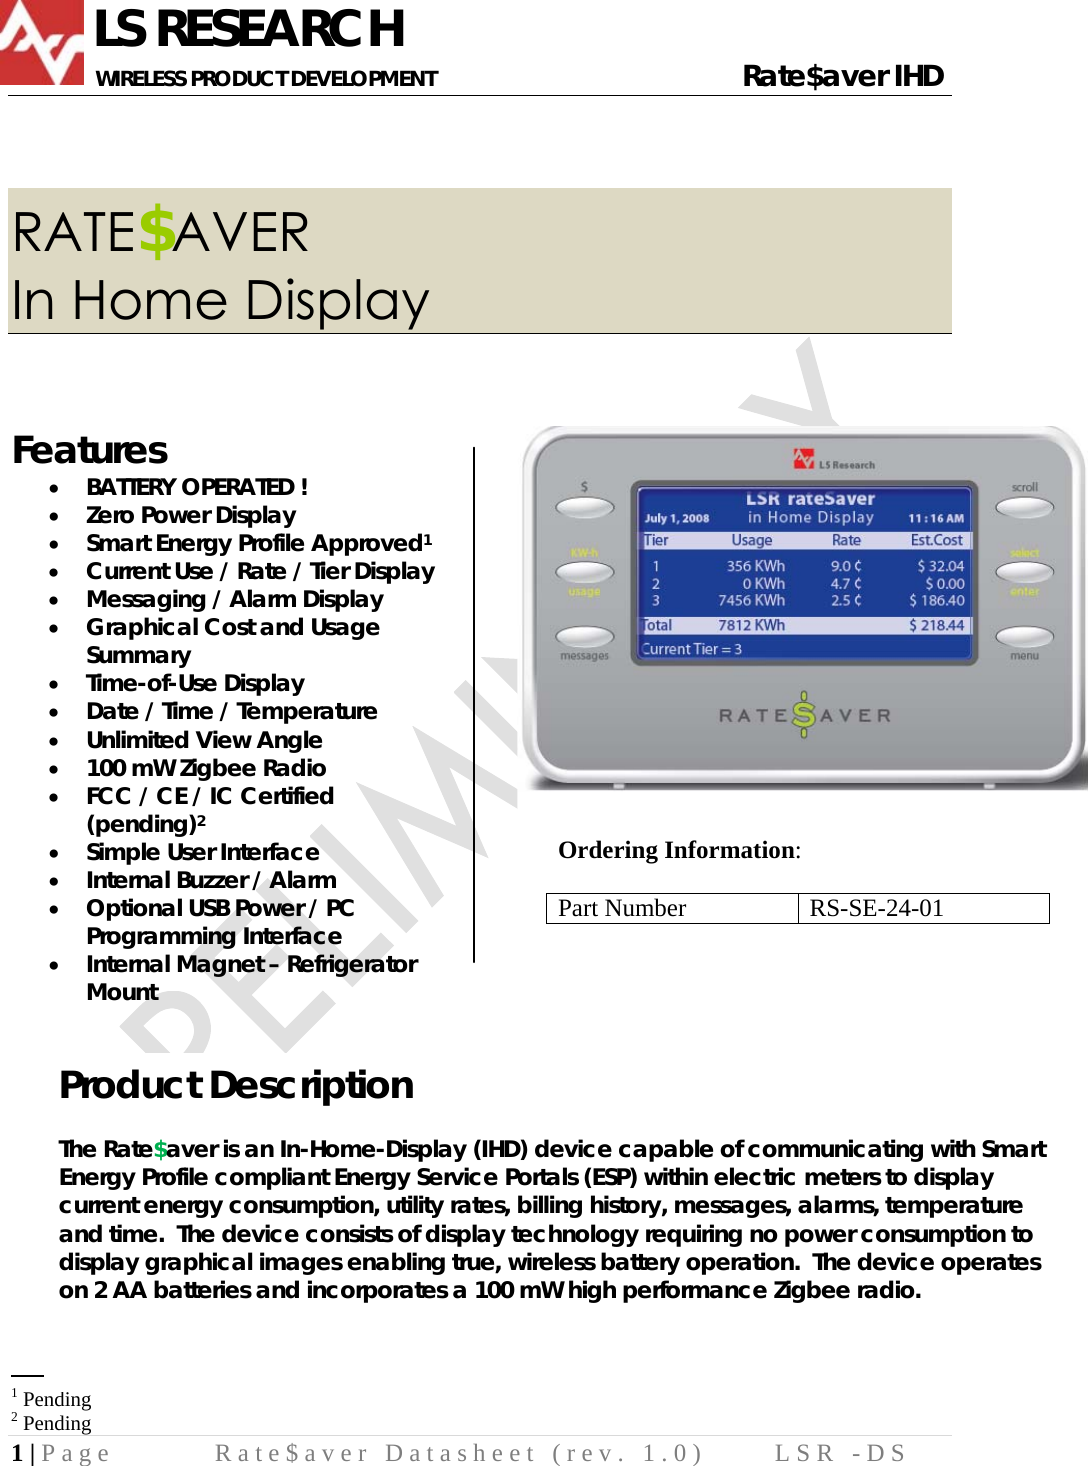              LS RESEARCH       WIRELESS PRODUCT DEVELOPMENT                                                     Rate$aver IHD 1 | Page  Rate$aver Datasheet (rev. 1.0)  LSR -DS   RATE$AVER In Home Display  Features • BATTERY OPERATED ! • Zero Power Display • Smart Energy Profile Approved1 • Current Use / Rate / Tier Display • Messaging / Alarm Display • Graphical Cost and Usage Summary • Time-of-Use Display • Date / Time / Temperature • Unlimited View Angle • 100 mW Zigbee Radio • FCC / CE / IC Certified (pending)2 • Simple User Interface • Internal Buzzer / Alarm • Optional USB Power / PC Programming Interface • Internal Magnet – Refrigerator Mount                                                     1 Pending 2 Pending Product Description  The Rate$aver is an In-Home-Display (IHD) device capable of communicating with Smart Energy Profile compliant Energy Service Portals (ESP) within electric meters to display current energy consumption, utility rates, billing history, messages, alarms, temperature and time.  The device consists of display technology requiring no power consumption to display graphical images enabling true, wireless battery operation.  The device operates on 2 AA batteries and incorporates a 100 mW high performance Zigbee radio.  Ordering Information:  Part Number  RS-SE-24-01  